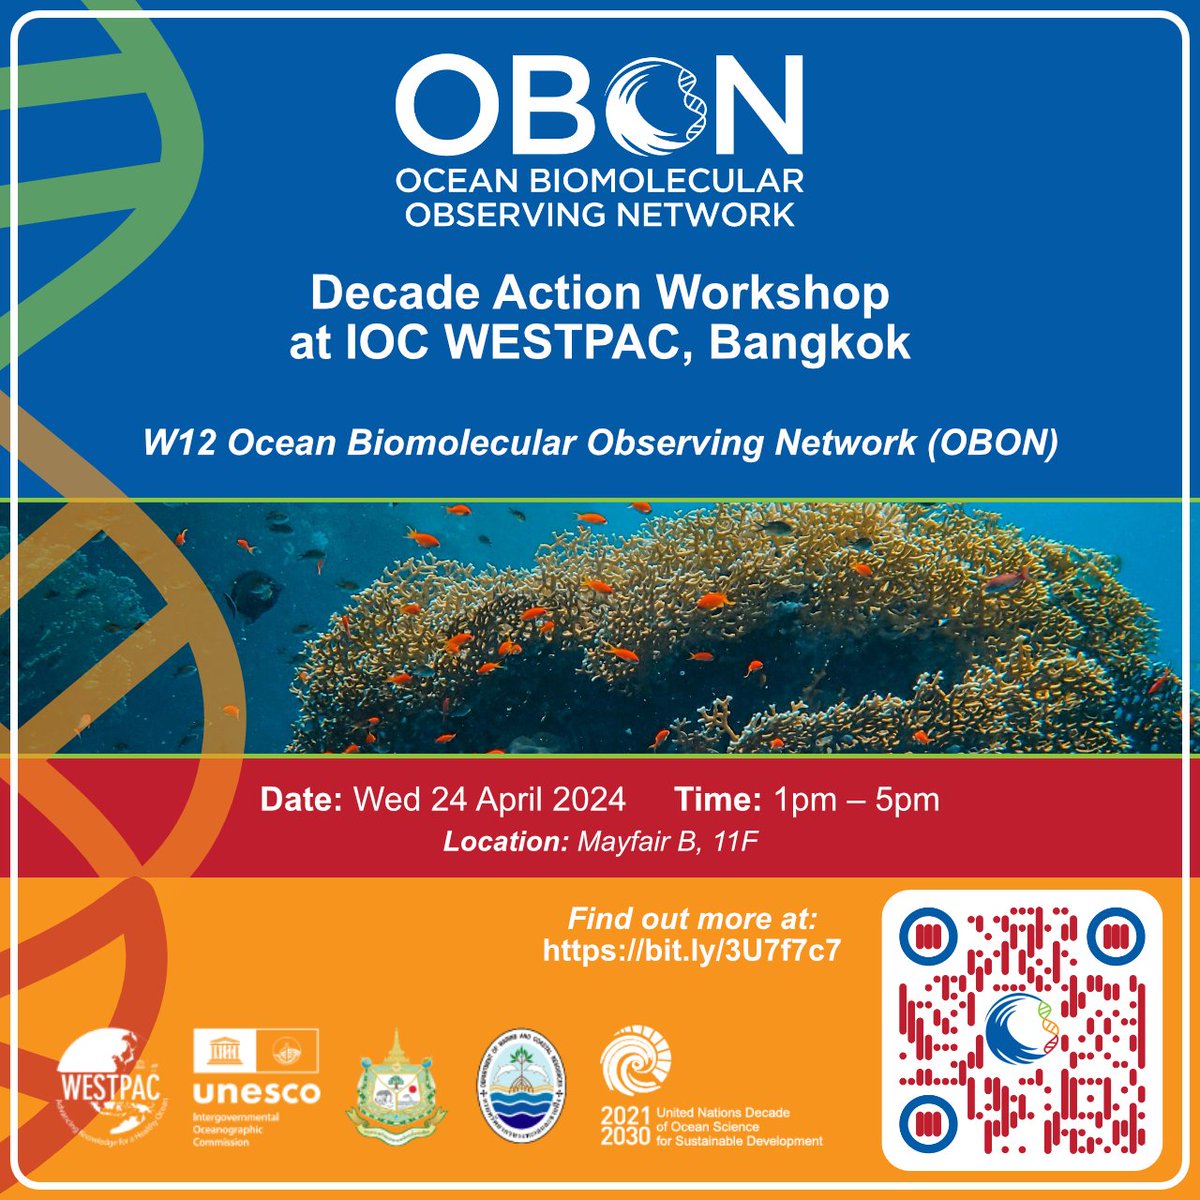 Are you attending the #IOCWESTPAC2024 meeting in Bangkok this week? On Wed 24 April, members of @obon_ocean will be convening a session within the @unoceandecade Action Workshops track. Please join us: ➡ Wed 24 April ➡ 1pm to 5pm ➡ Mayfair B, 11F bit.ly/3U7f7c7